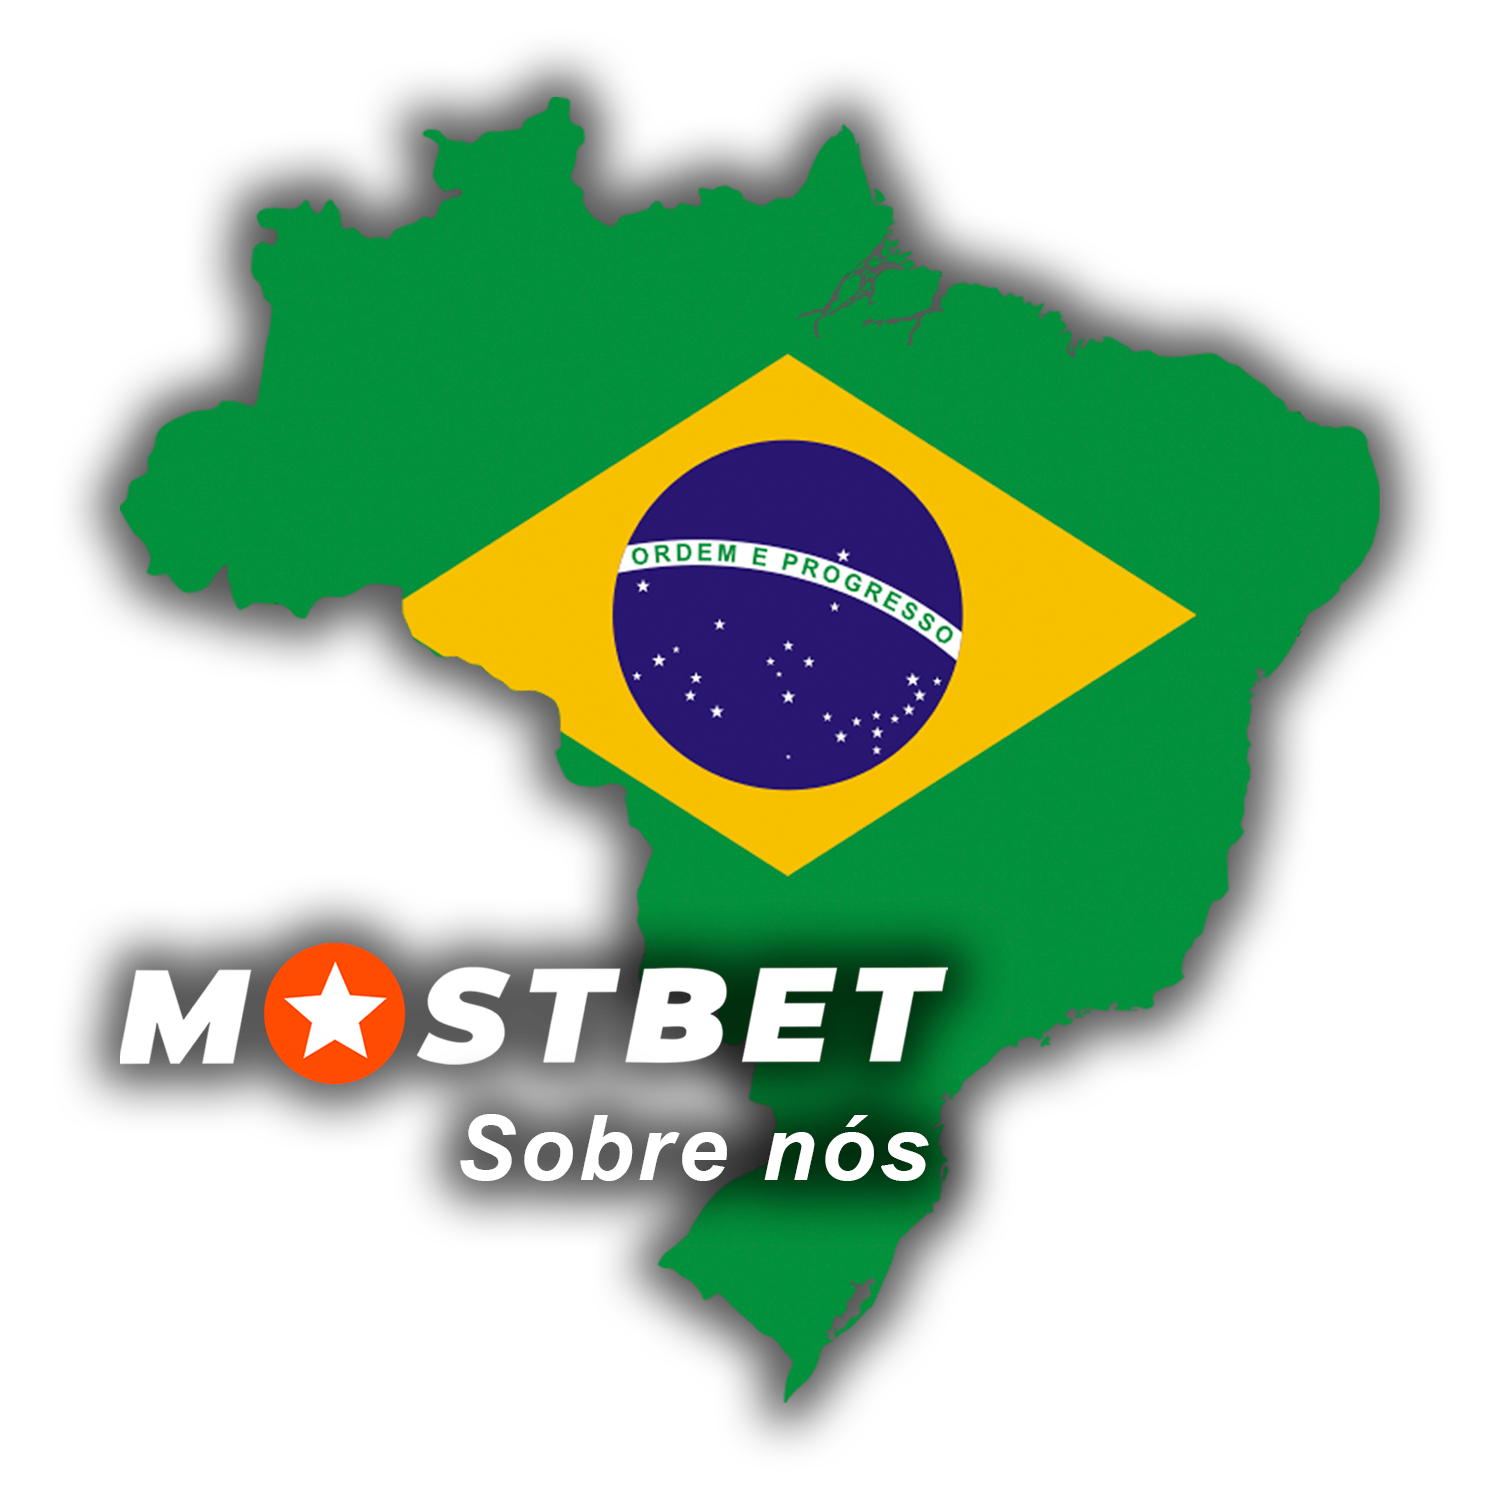 We provide sports betting and casino entertainment in the Brazilian market.